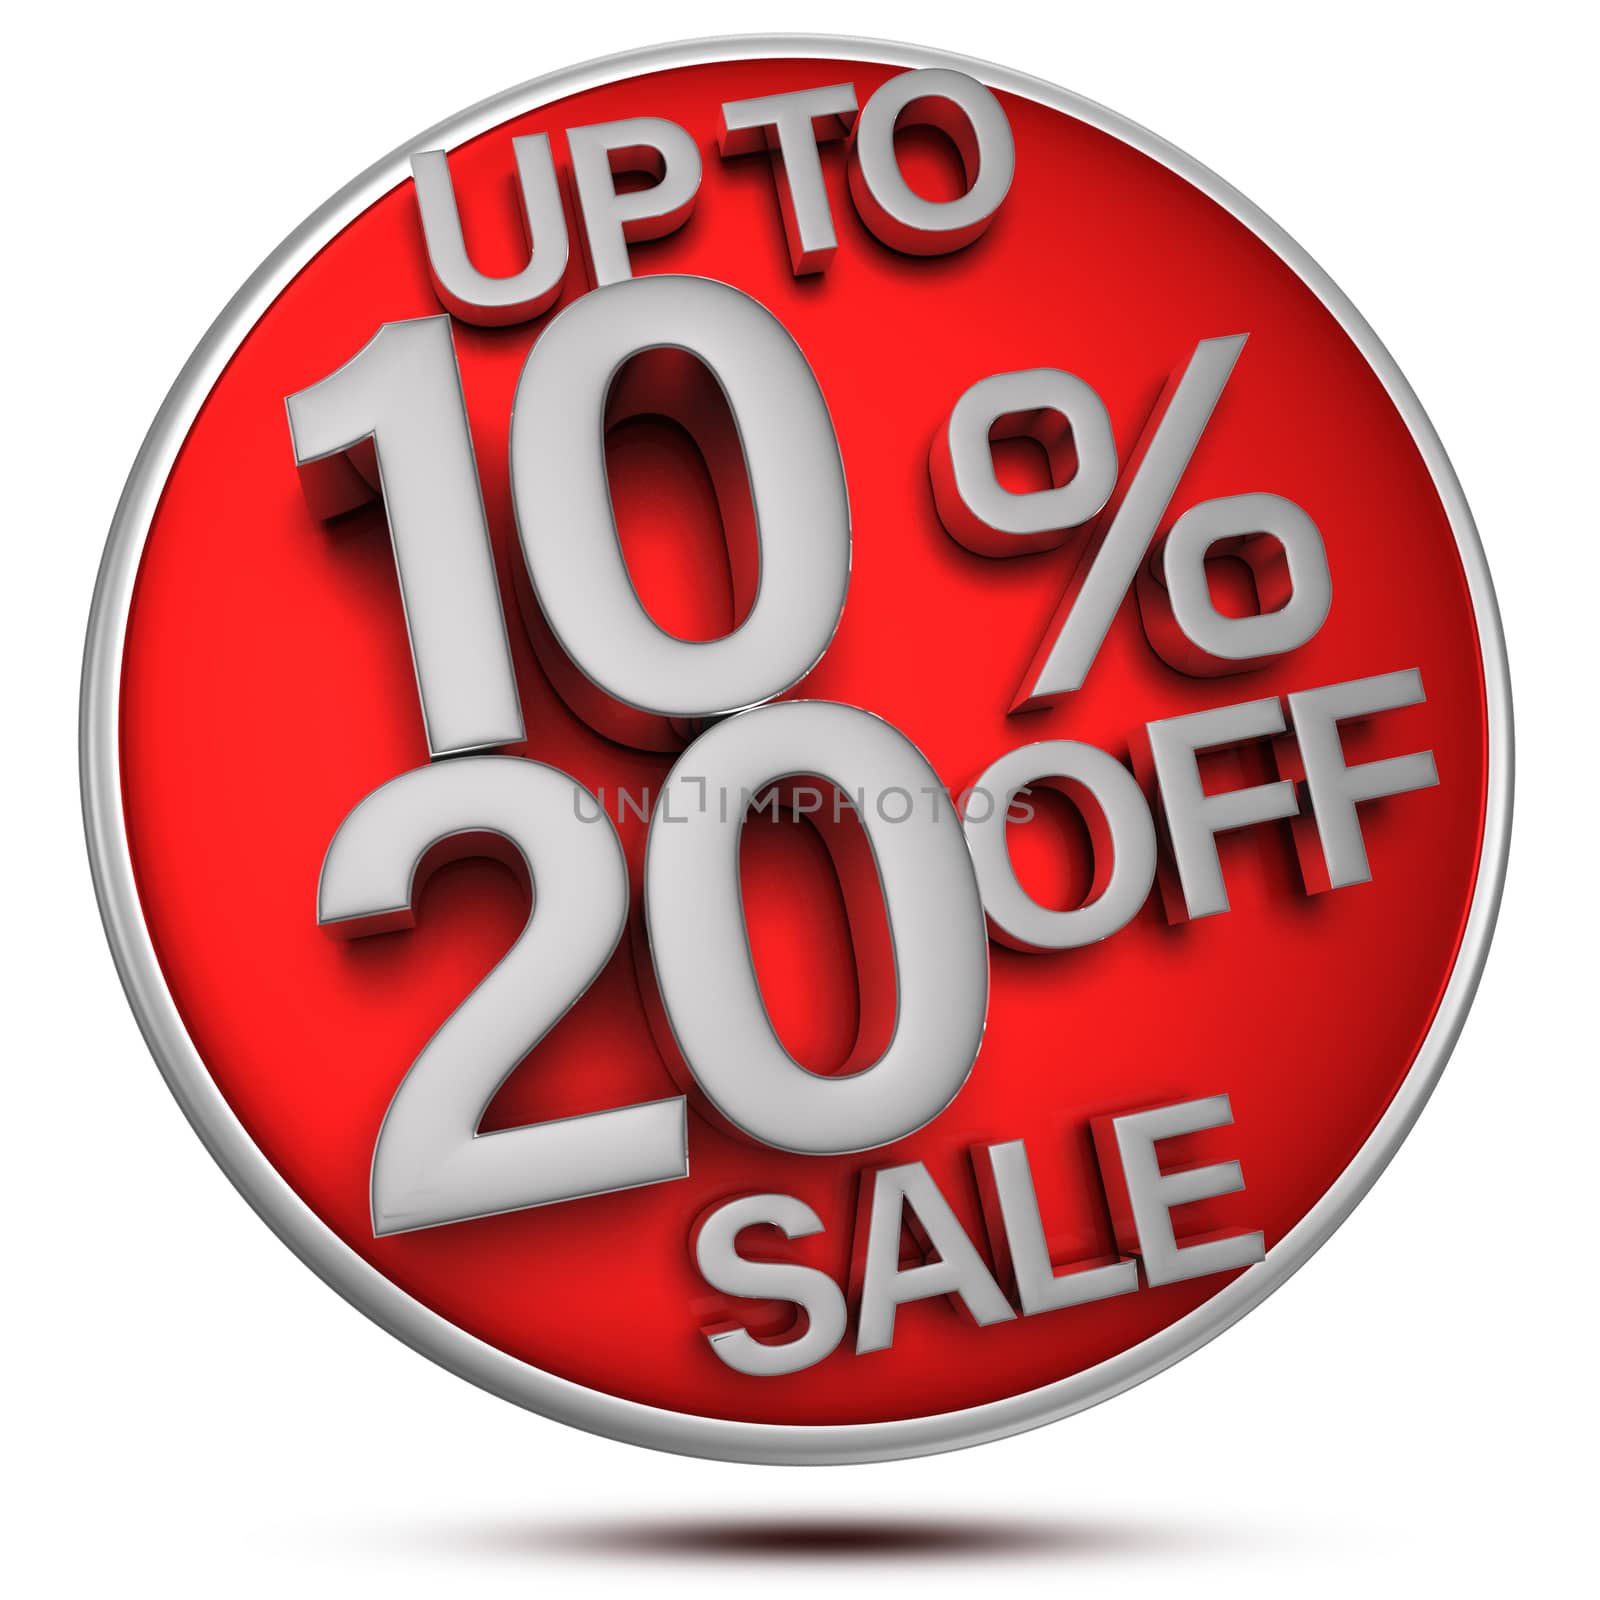 Up to 10-20% off sale 3d rendering on white background.(with Clipping Path).